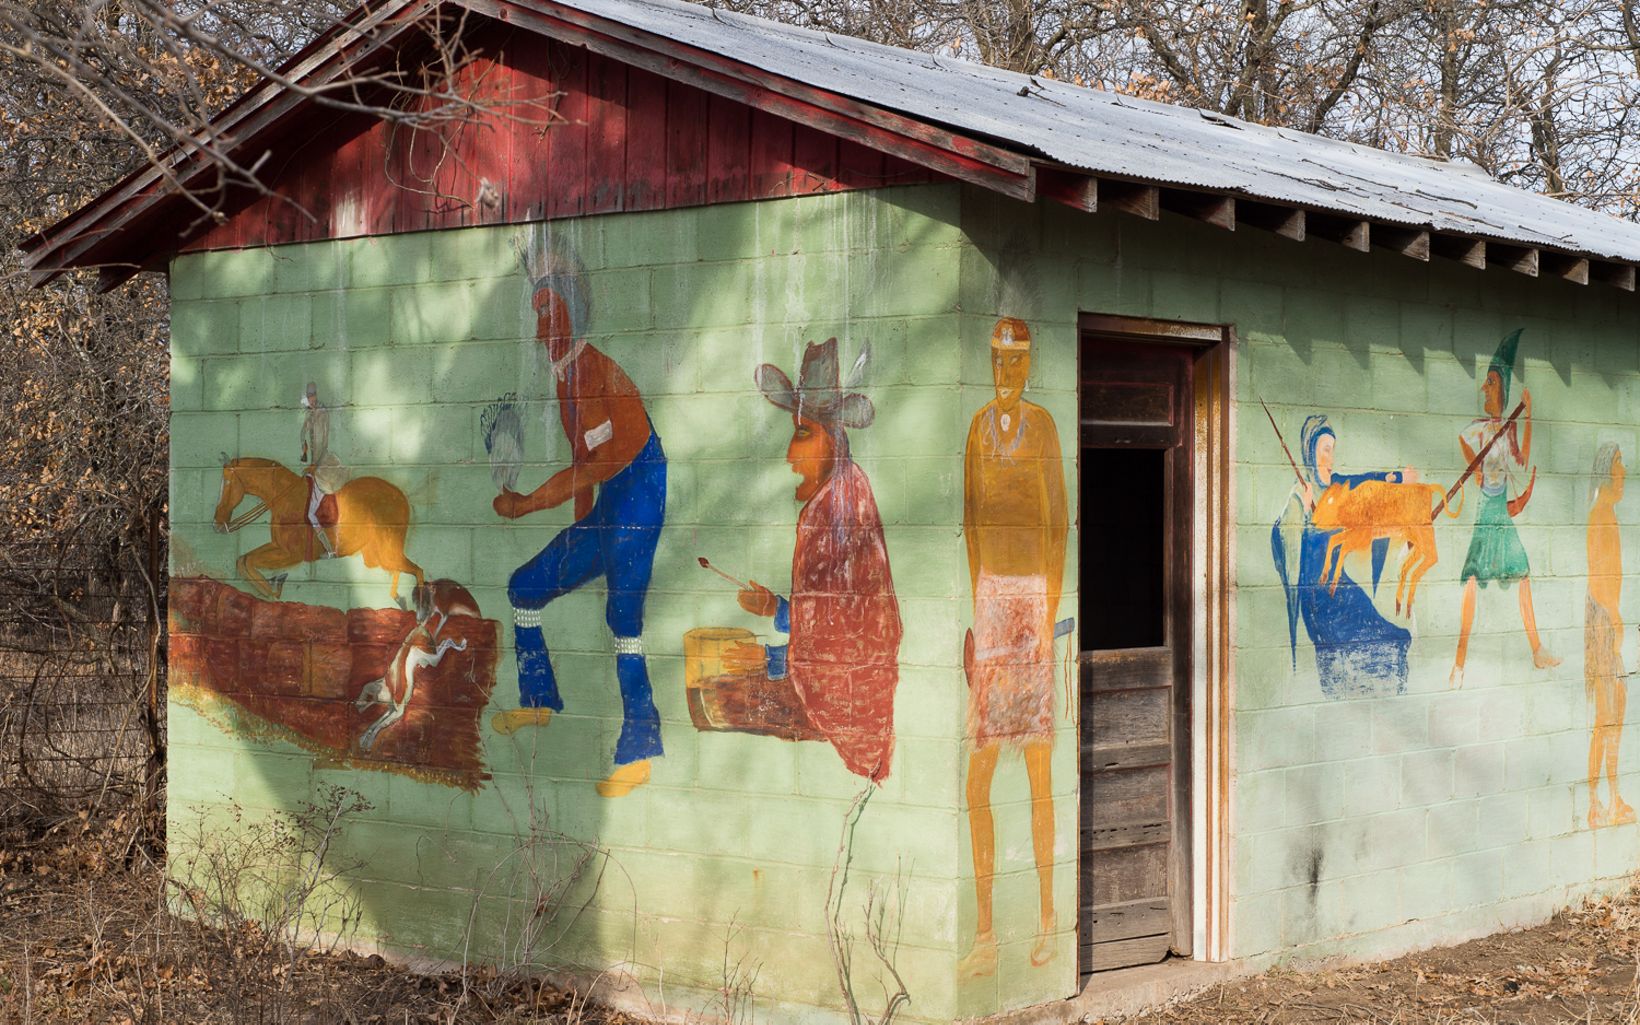 Outbuilding Art Mathews painted his depiction of the history of man on his outbuilding near the cabin. © George Pierson